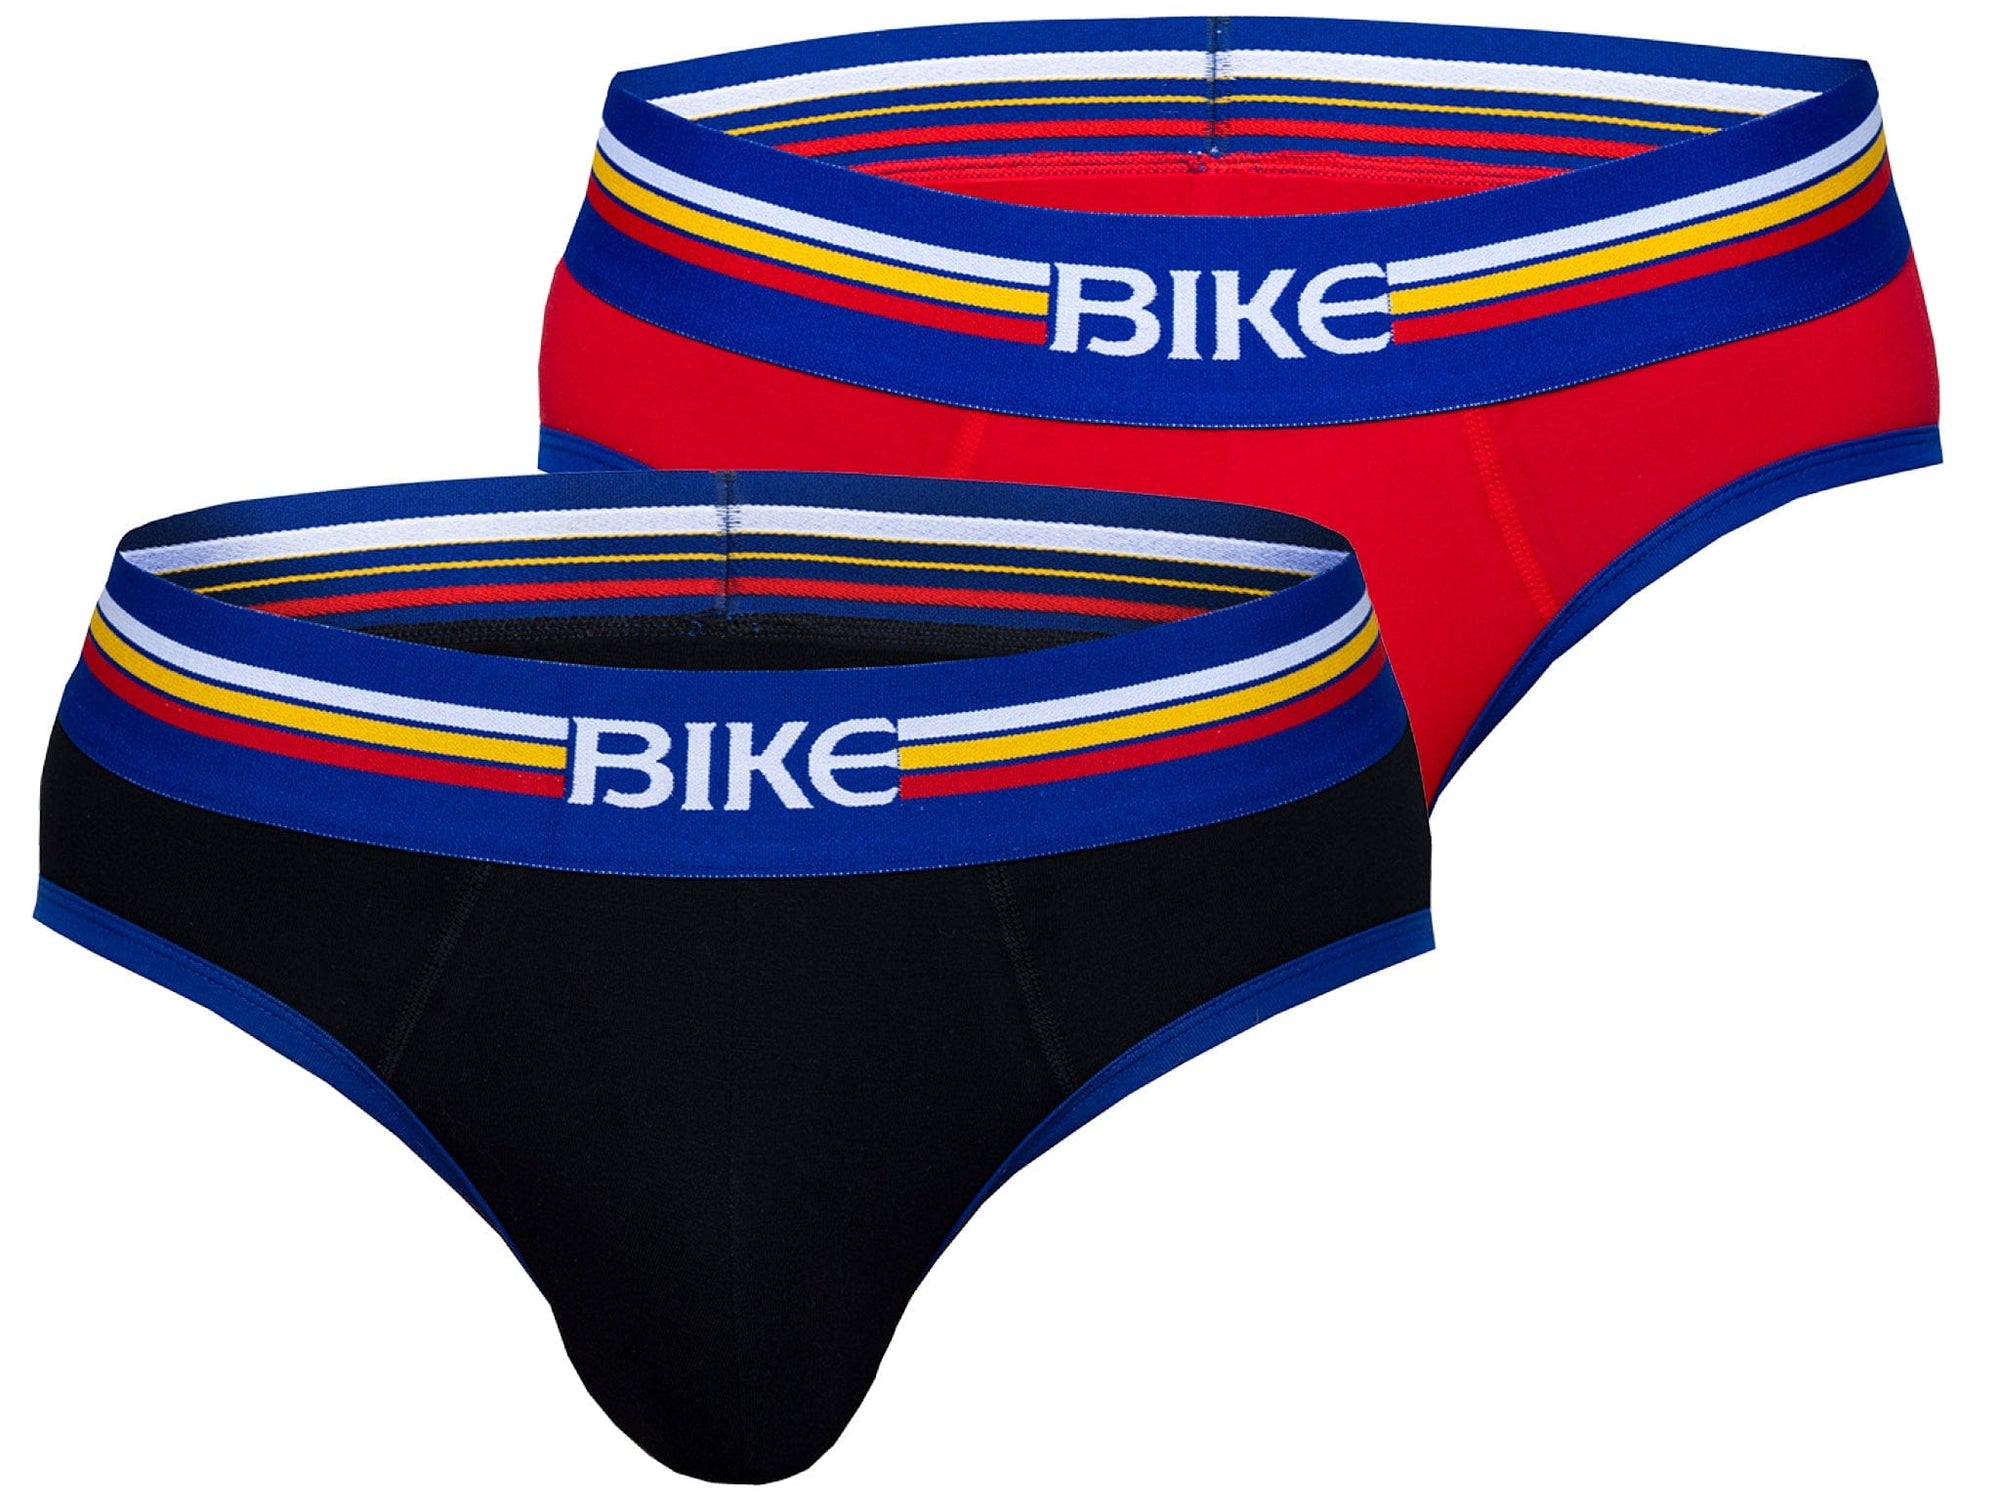  3D of black and red Bike Athletic underwear briefs